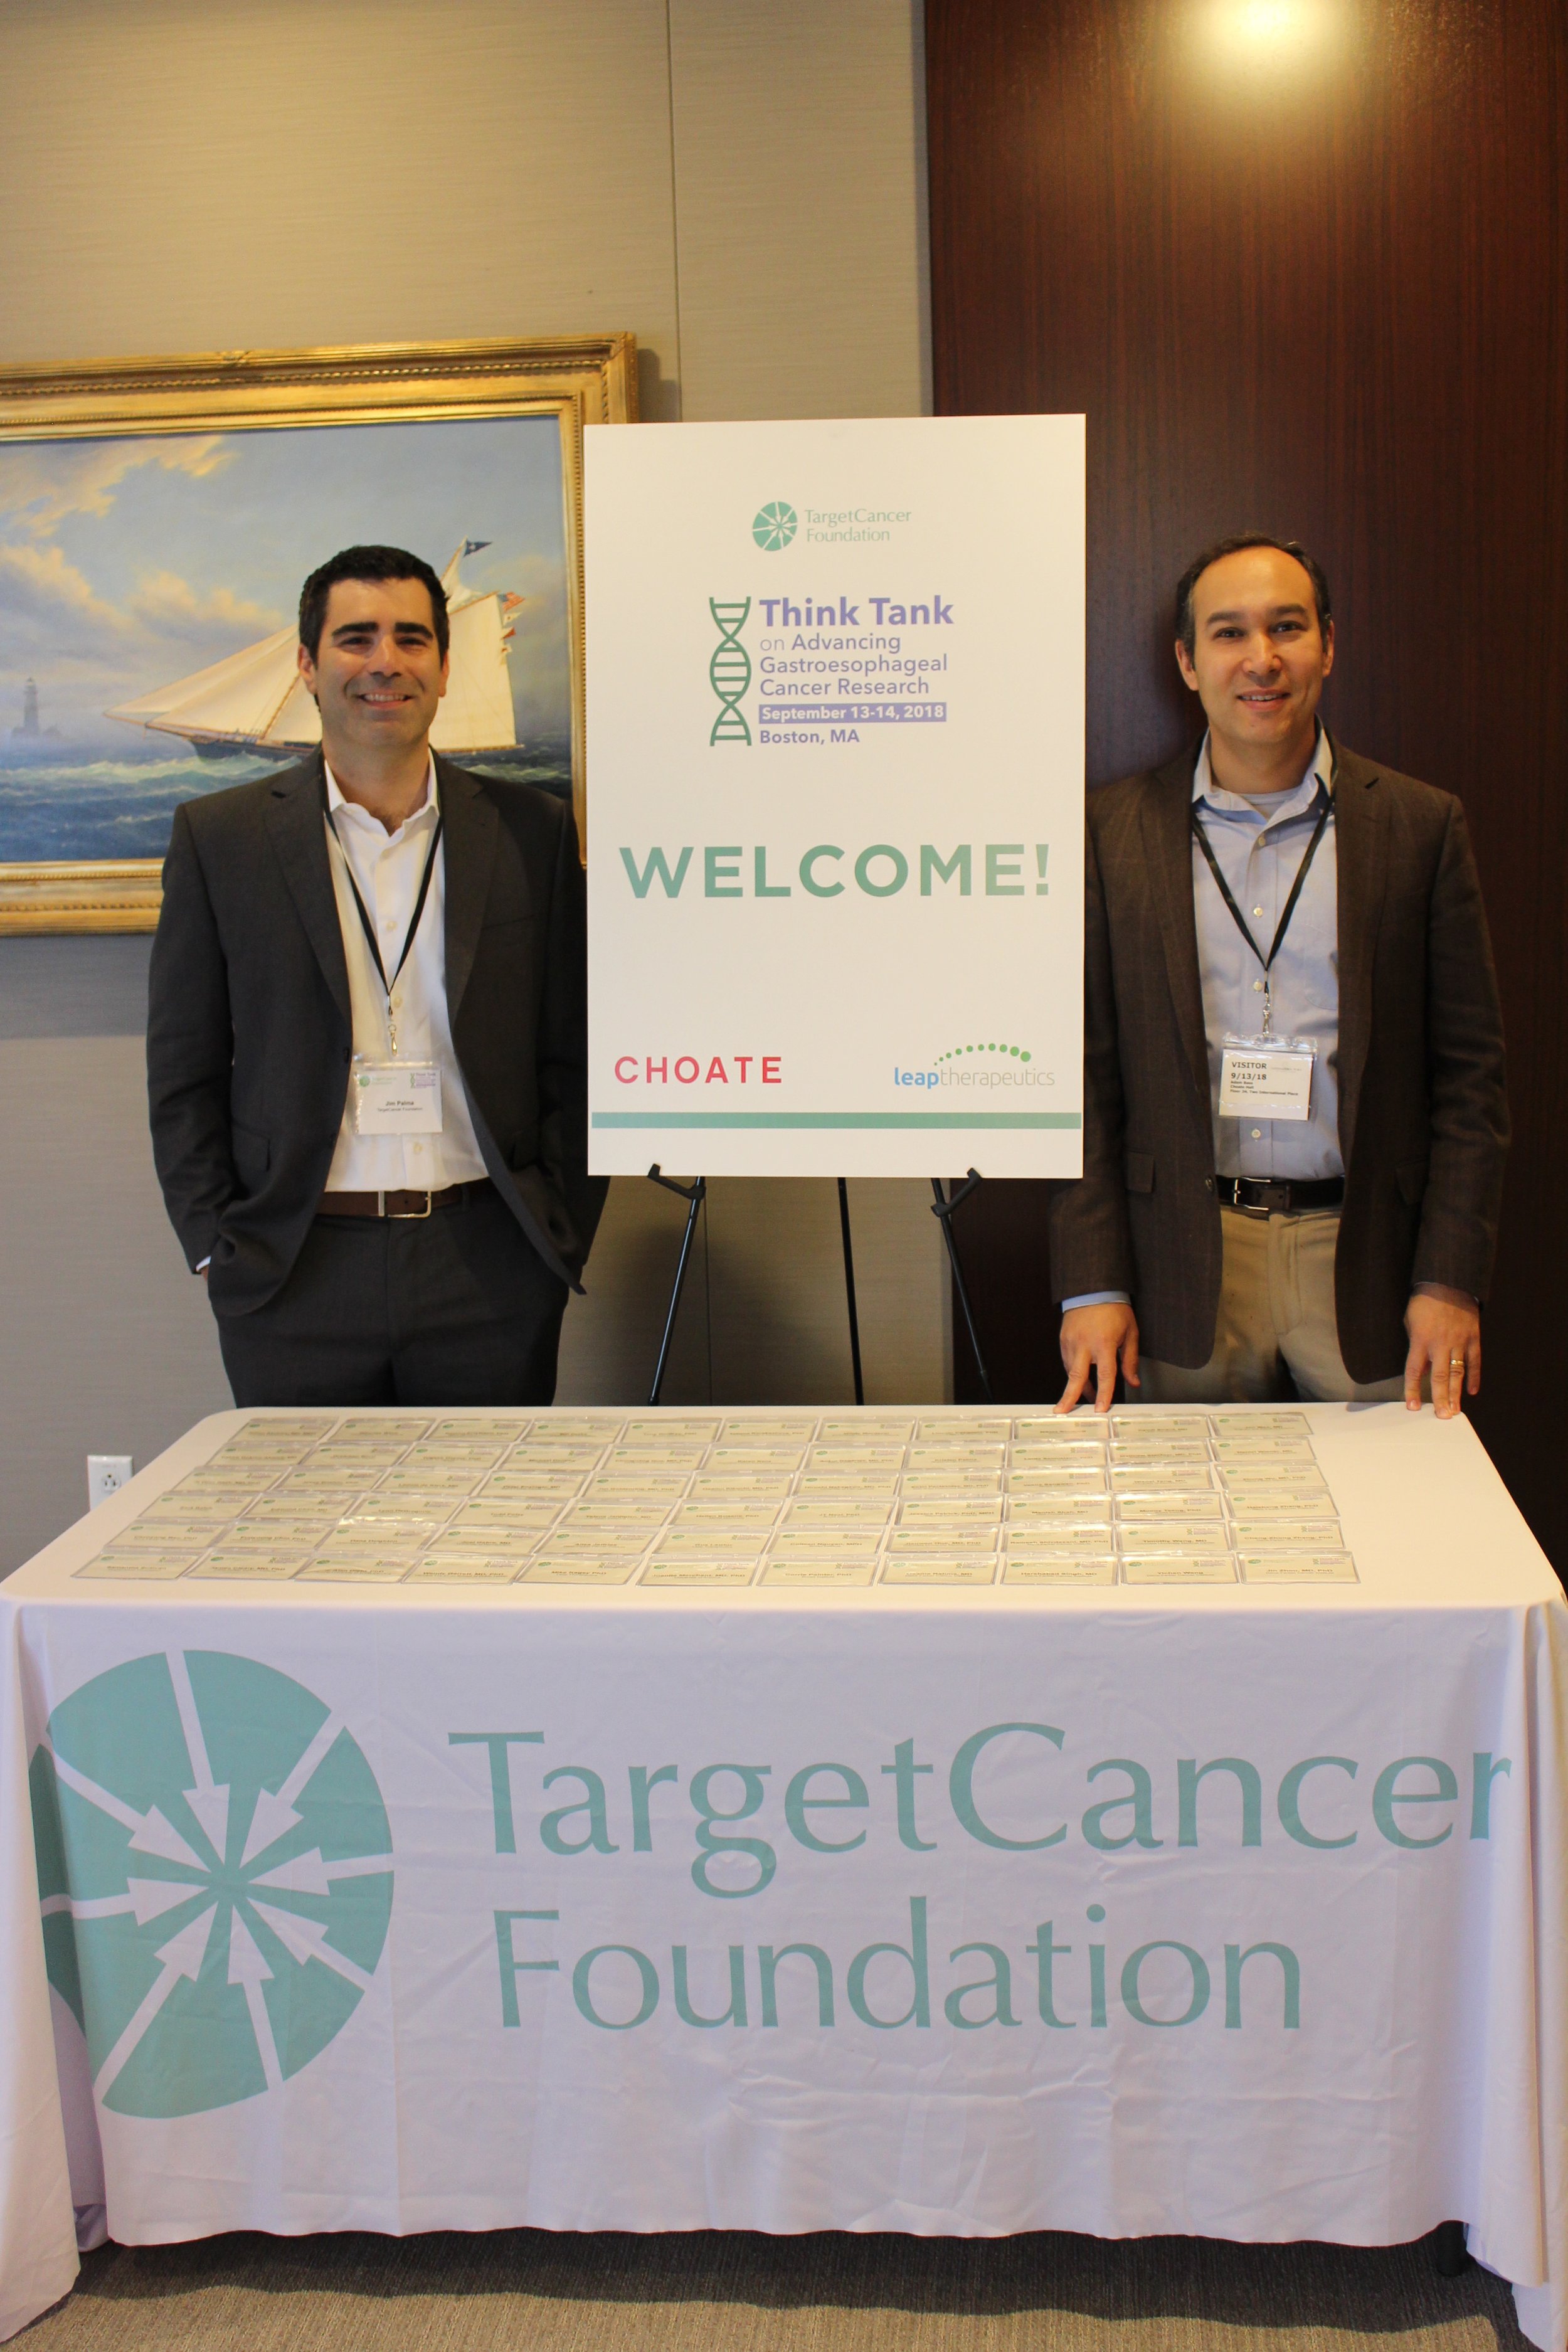 Jim Palma, left, and Adam Bass, MD, an esophageal cancer researcher supported by the foundation, at the 2018 Think Tank on Advancing Gastroesophageal Cancer Research.